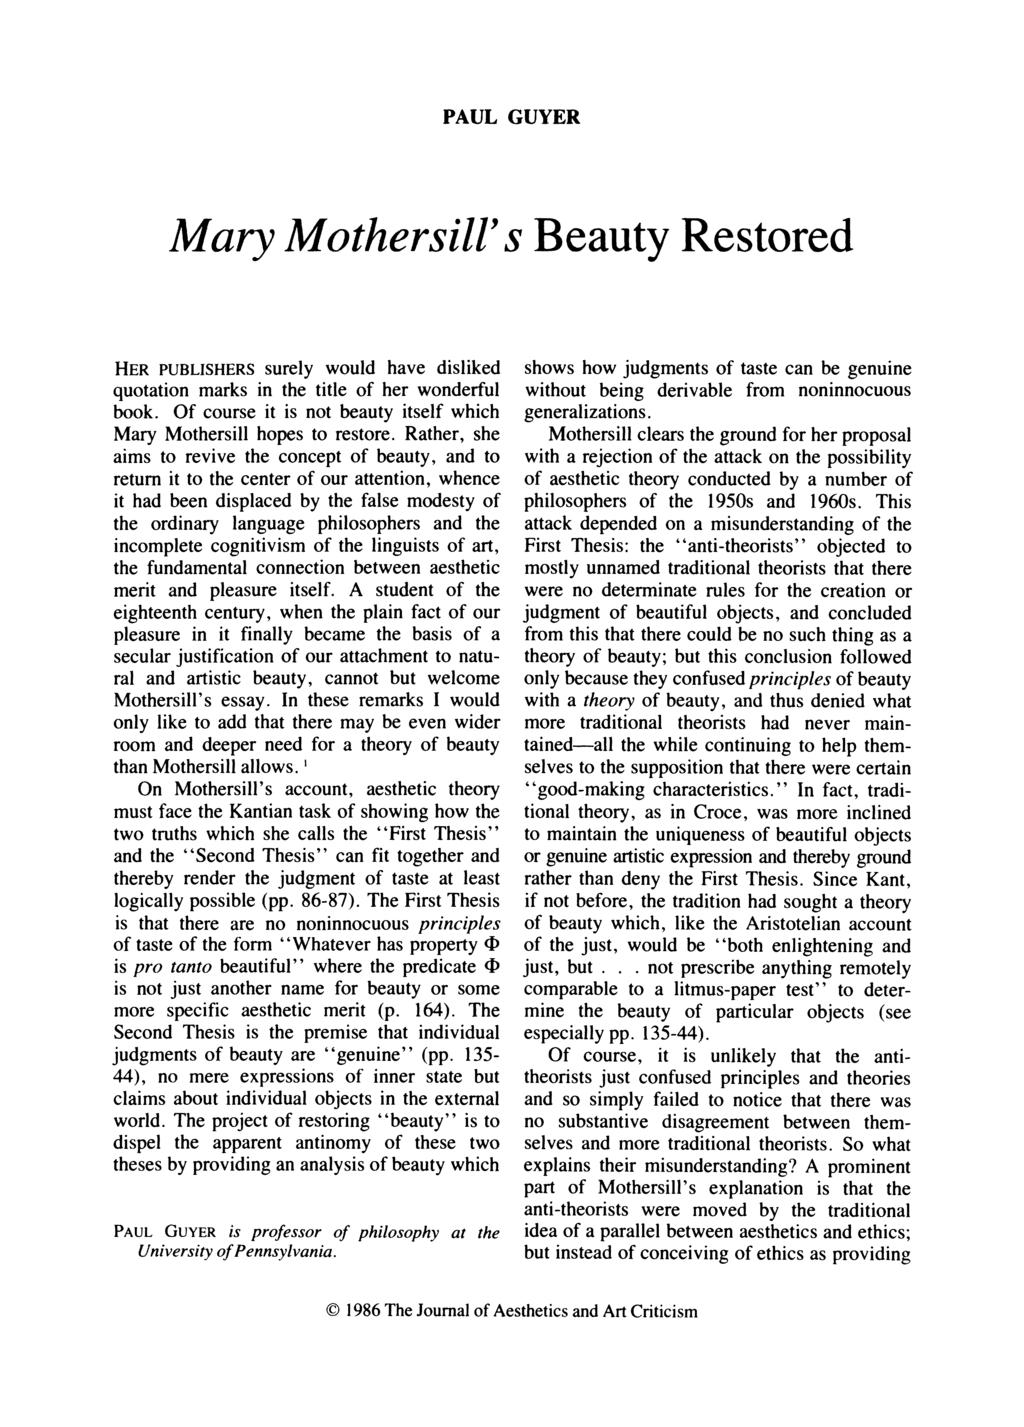 PAUL GUYER Mary Mothersill's Beauty Restored HER PUBLISHERS surely would have disliked quotation marks in the title of her wonderful book.